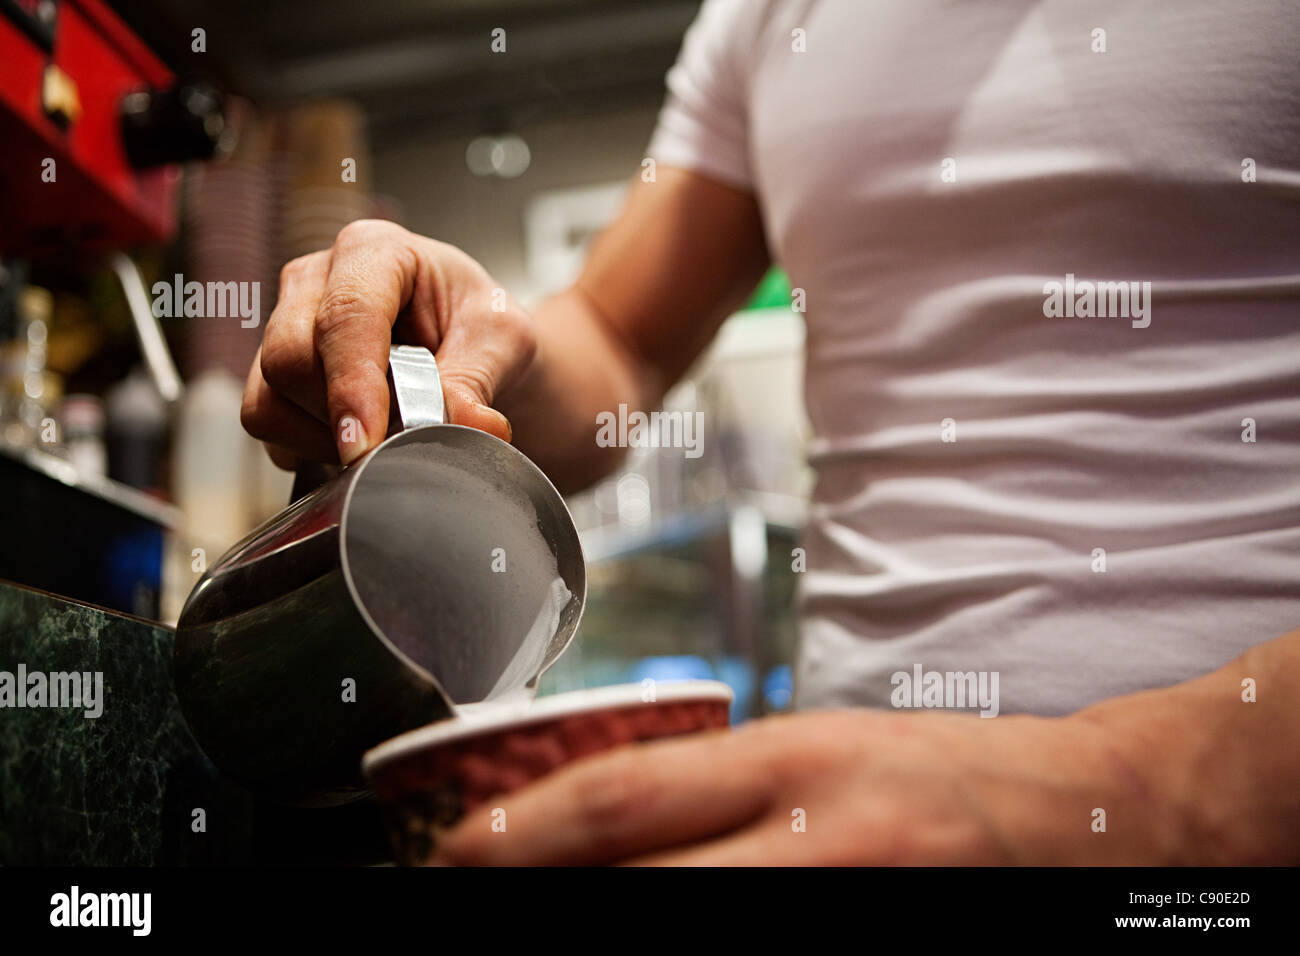 Man making coffee in cafe, close up Stock Photo